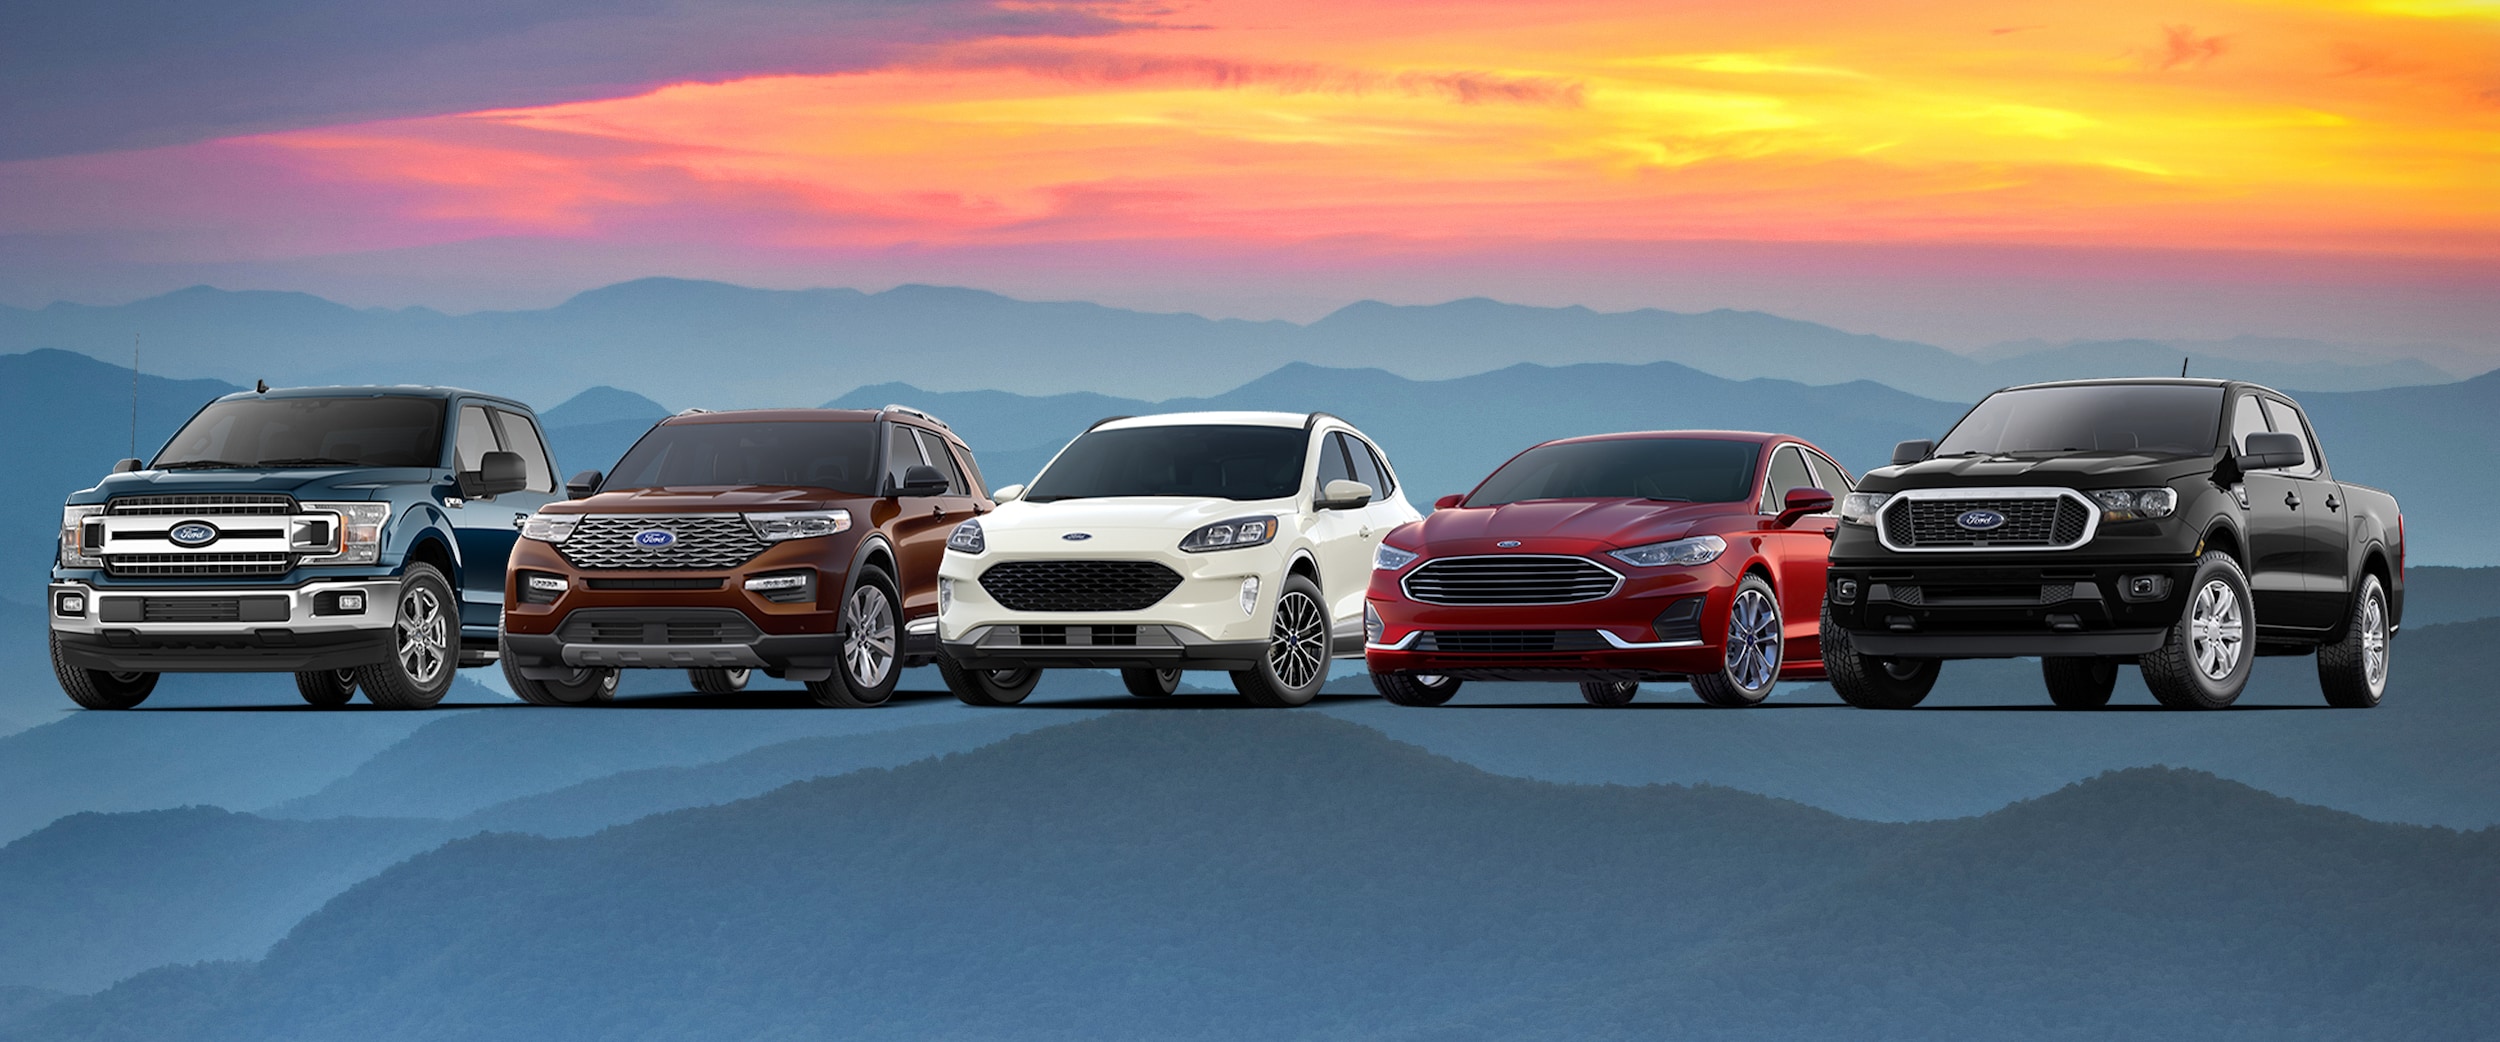 Keith Hawthorne Ford View The New Ford Model Lineup With 2019 Models